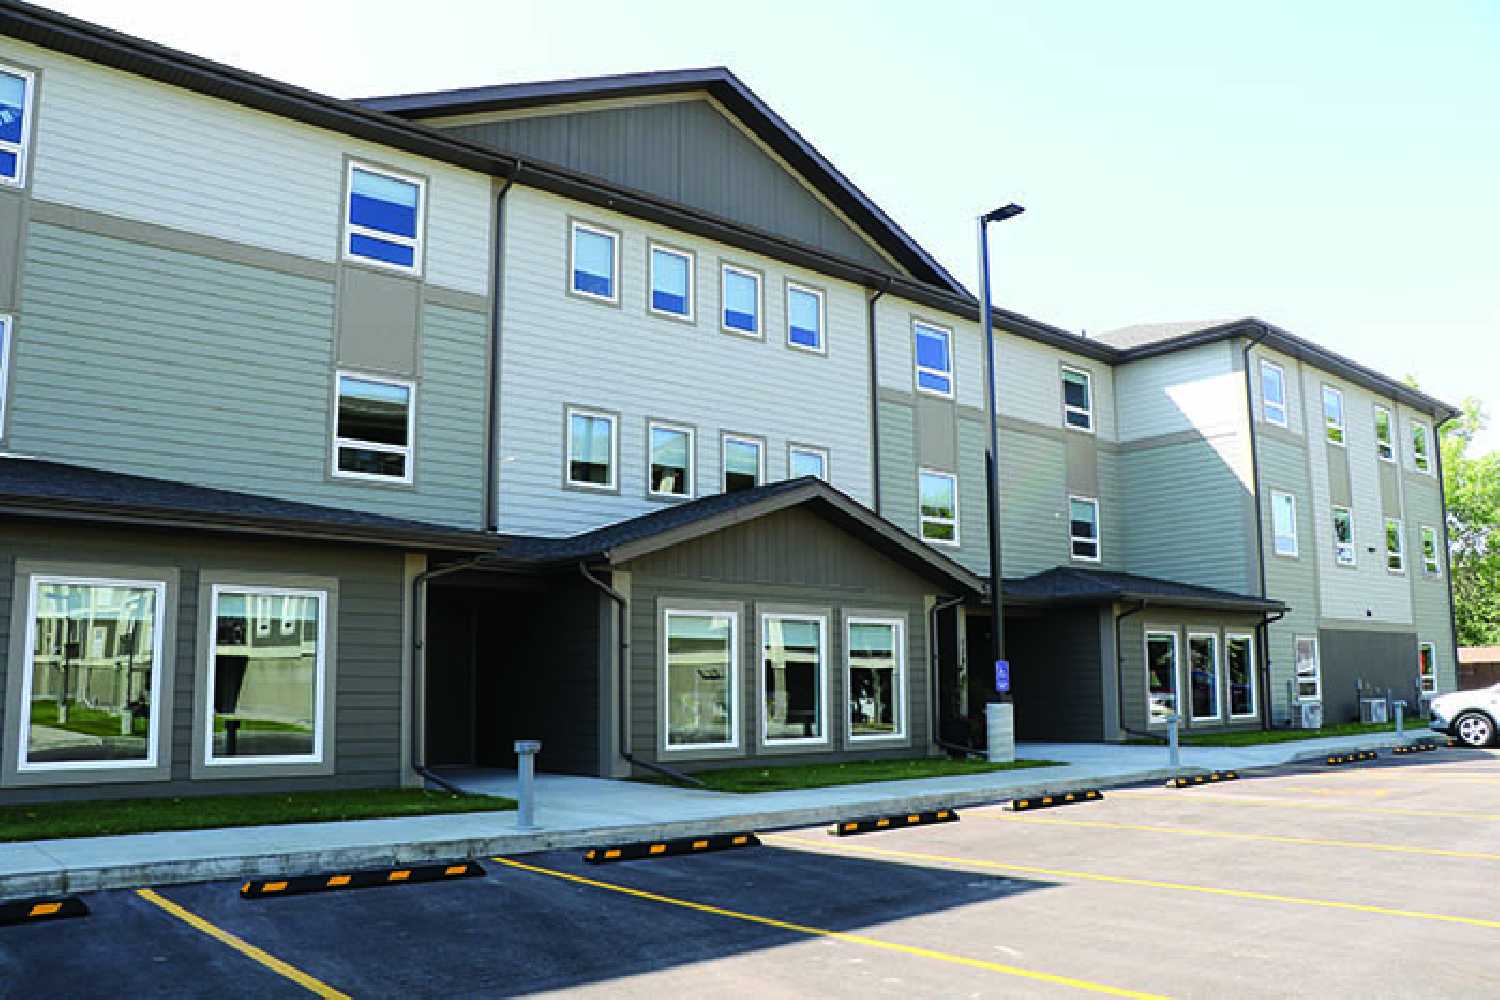 Cobblestone House, a 42-unit long-term care and assisted living facility officially opened on Aug.1, and will be having their grand opening to the public on Wednesday, Sept. 27.